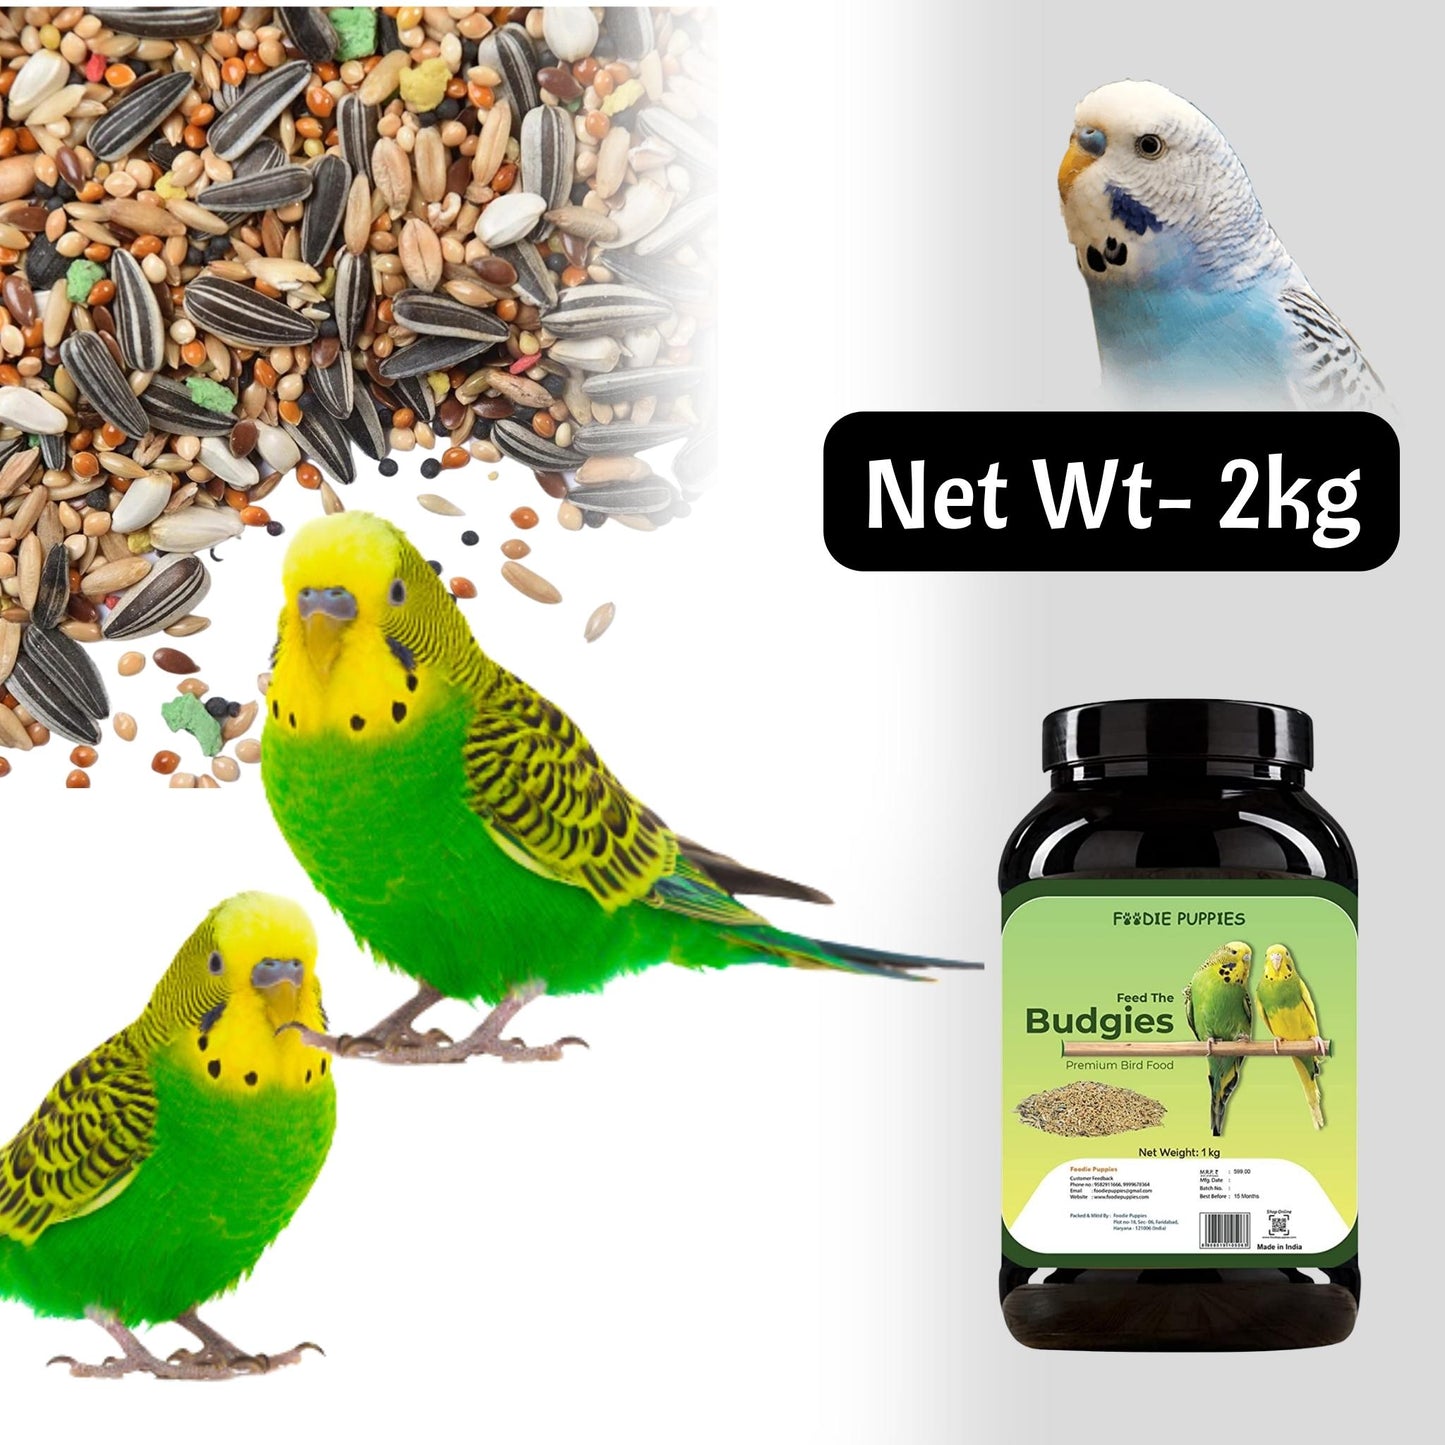 Foodie Puppies Budgie Mix Seeds - 2Kg | Suitable for All Type of Birds